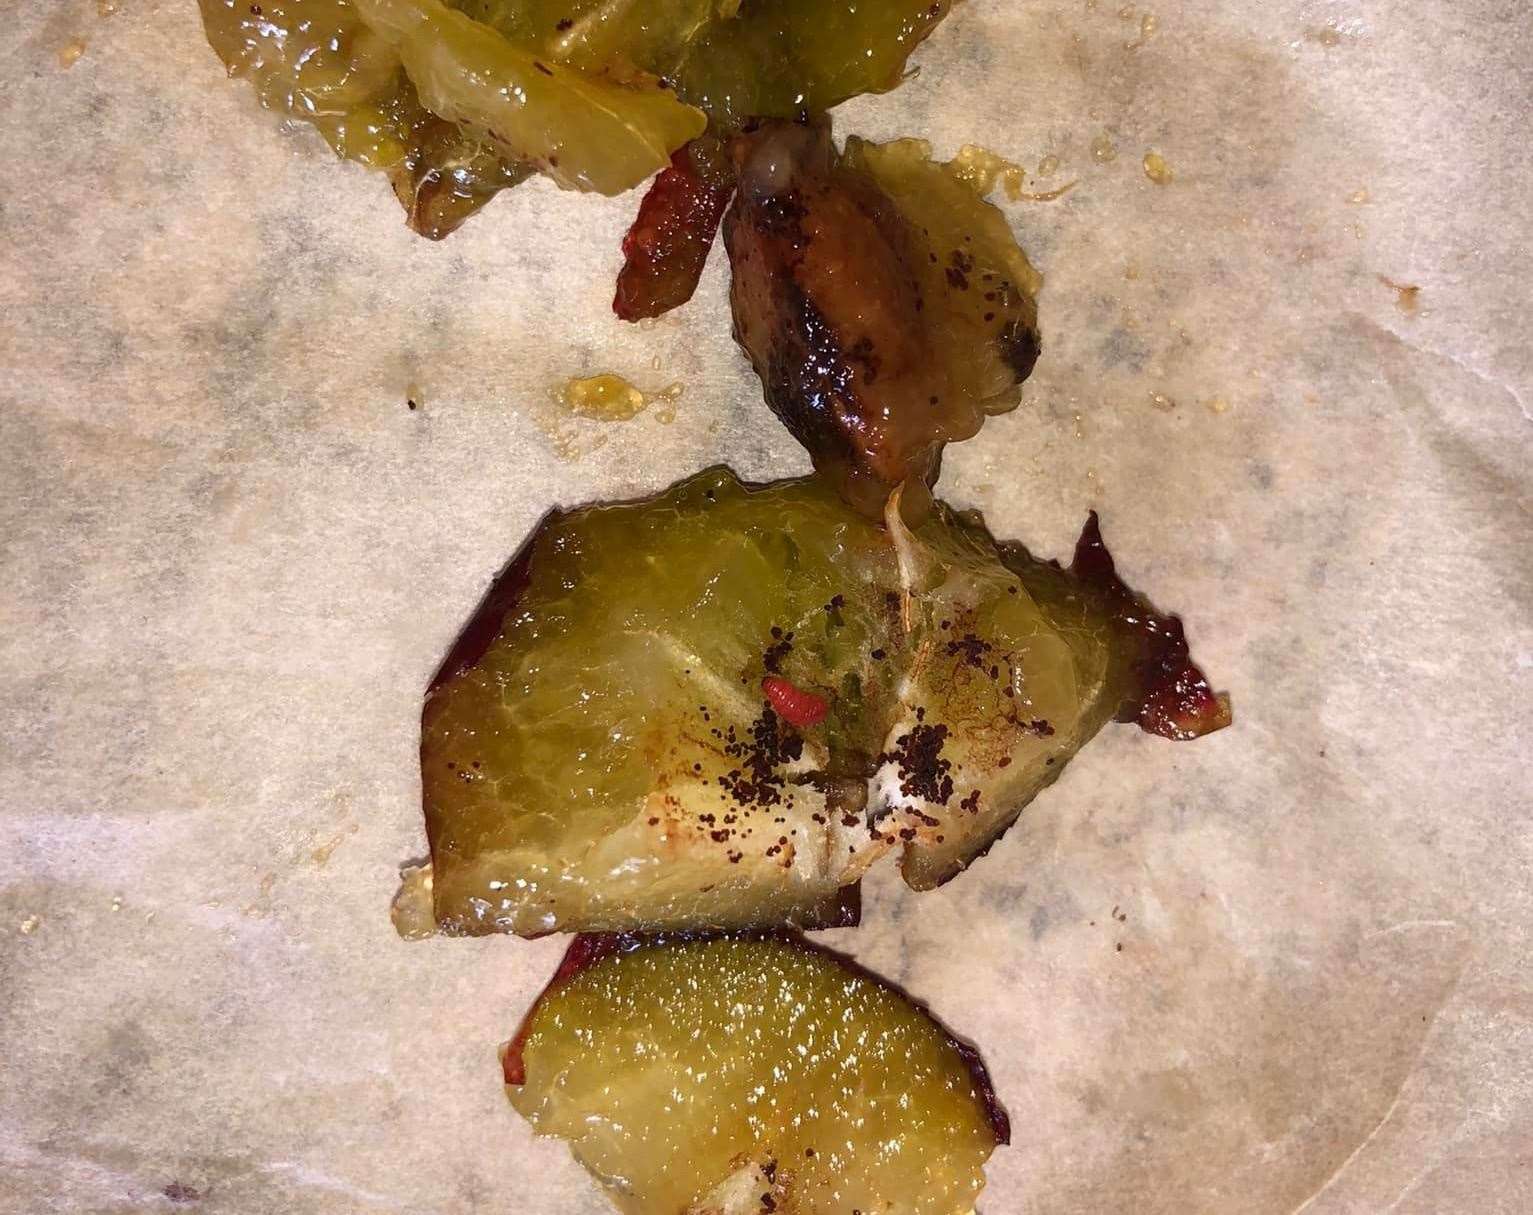 Aldi have apologised after the grim find. Photo: Rose Reece